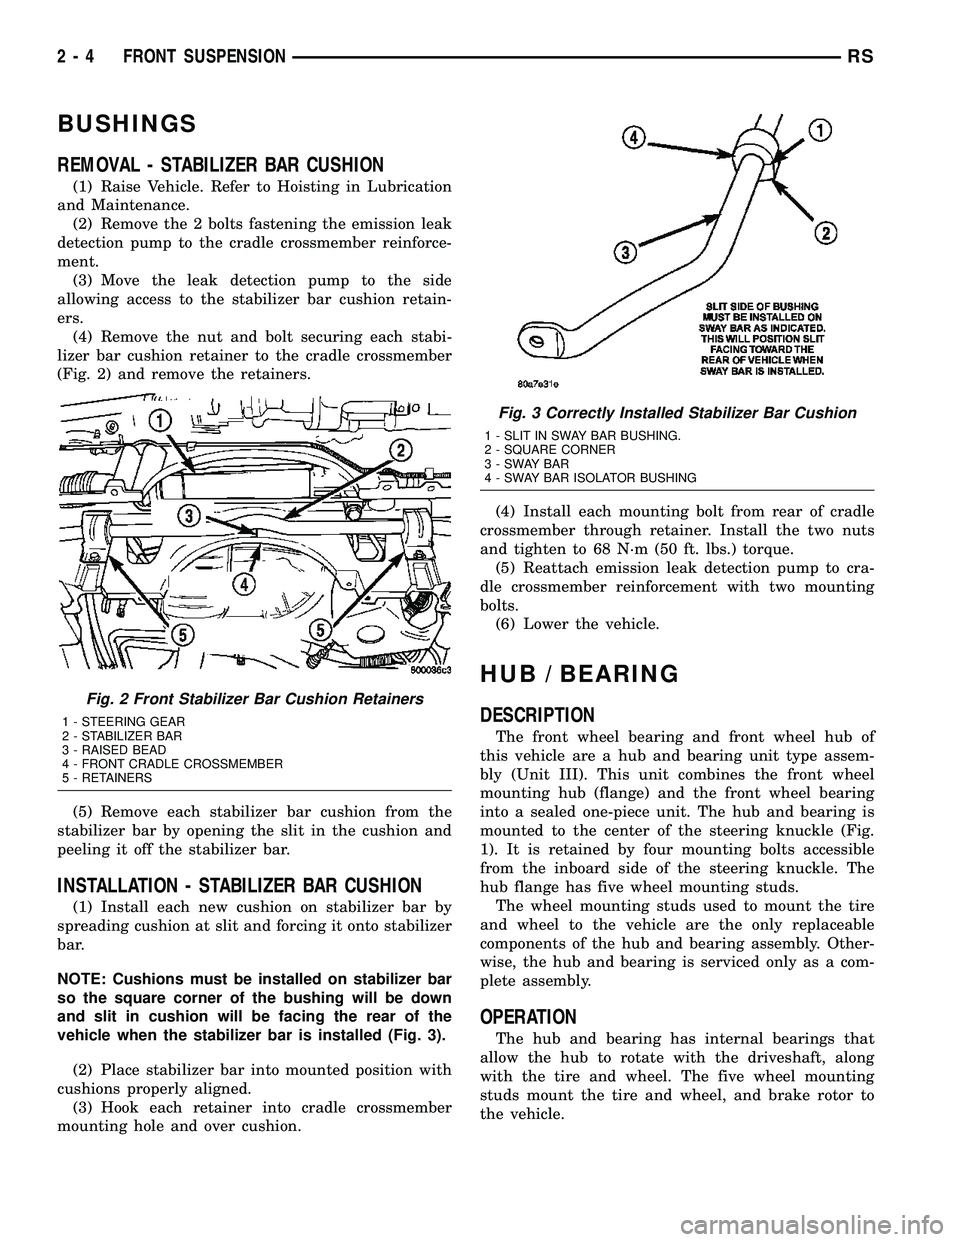 DODGE TOWN AND COUNTRY 2004  Service Manual BUSHINGS
REMOVAL - STABILIZER BAR CUSHION
(1) Raise Vehicle. Refer to Hoisting in Lubrication
and Maintenance.
(2) Remove the 2 bolts fastening the emission leak
detection pump to the cradle crossmemb